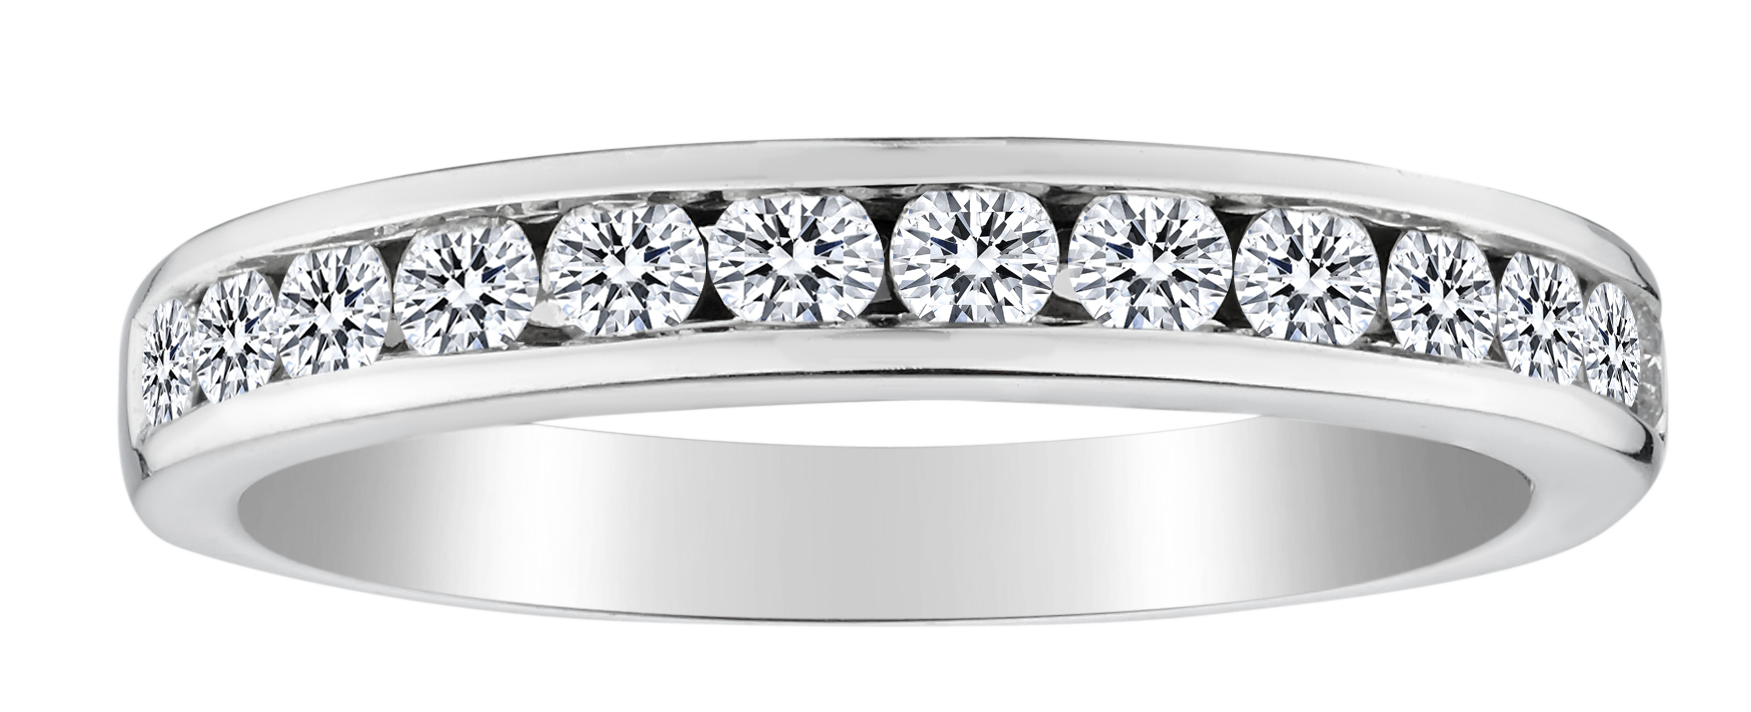 .50 Carat of Diamonds Band, 14kt White Gold.....................NOW